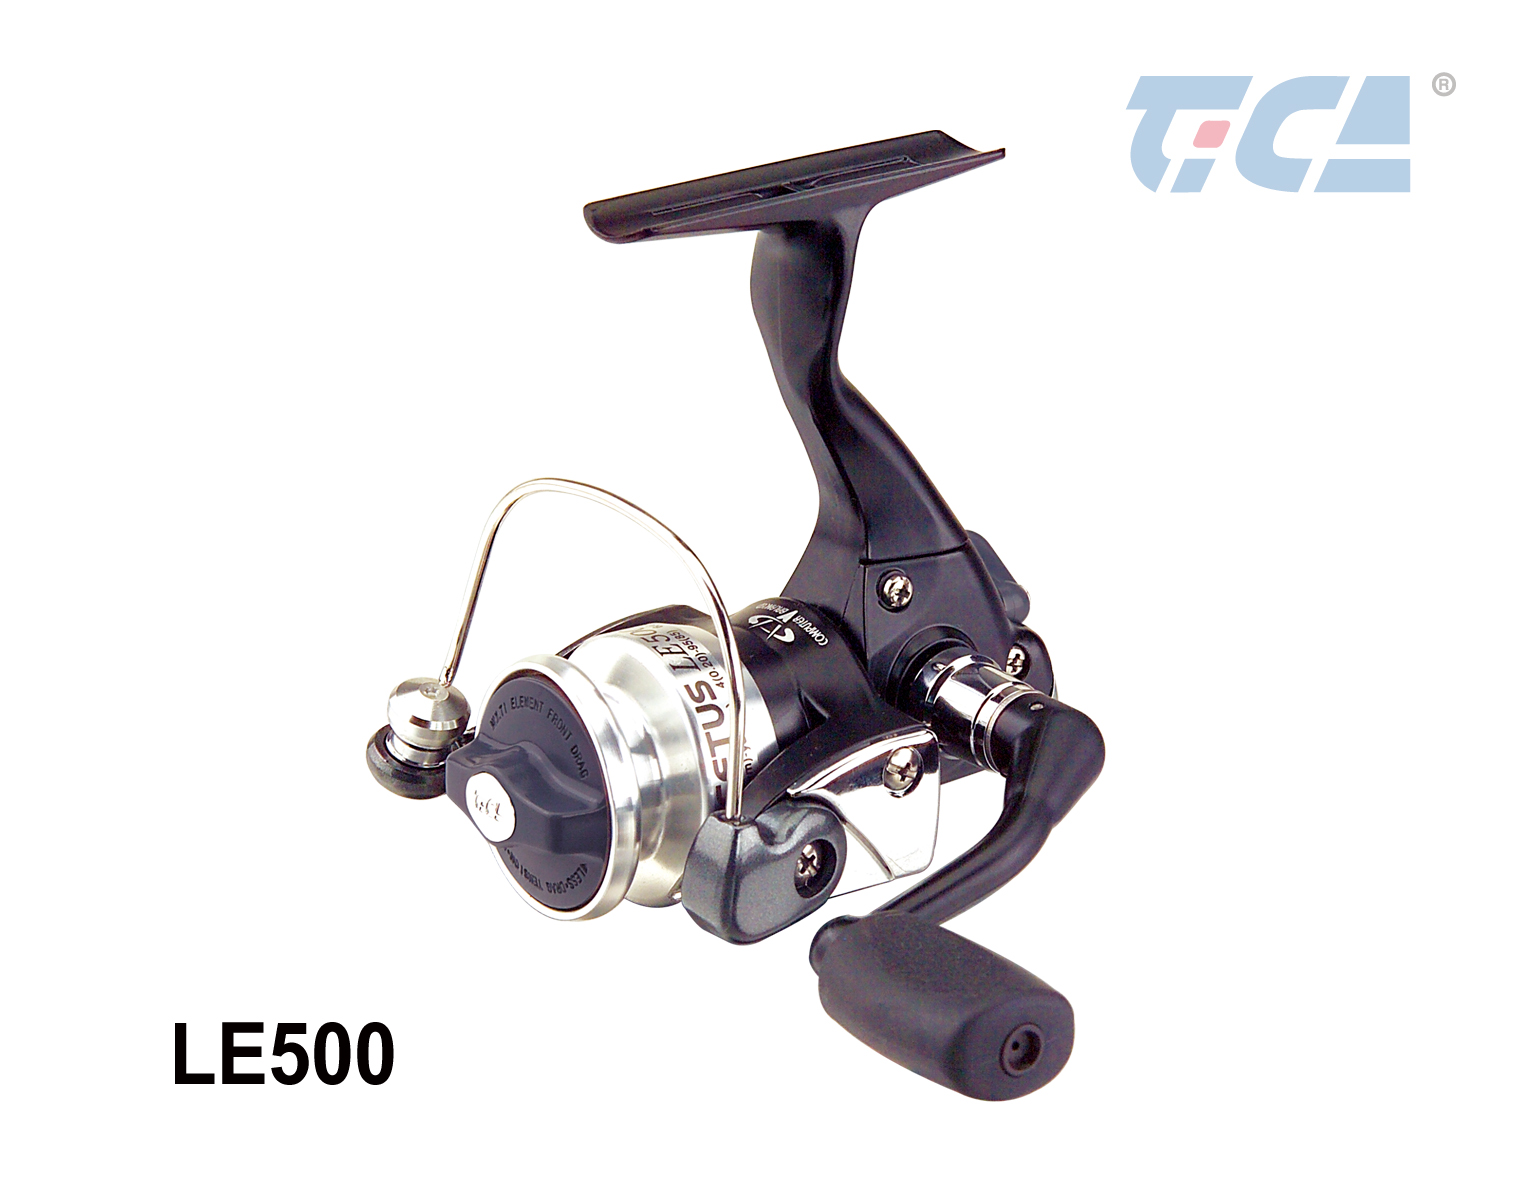 CETUS-SS – Tica Fishing Tackle